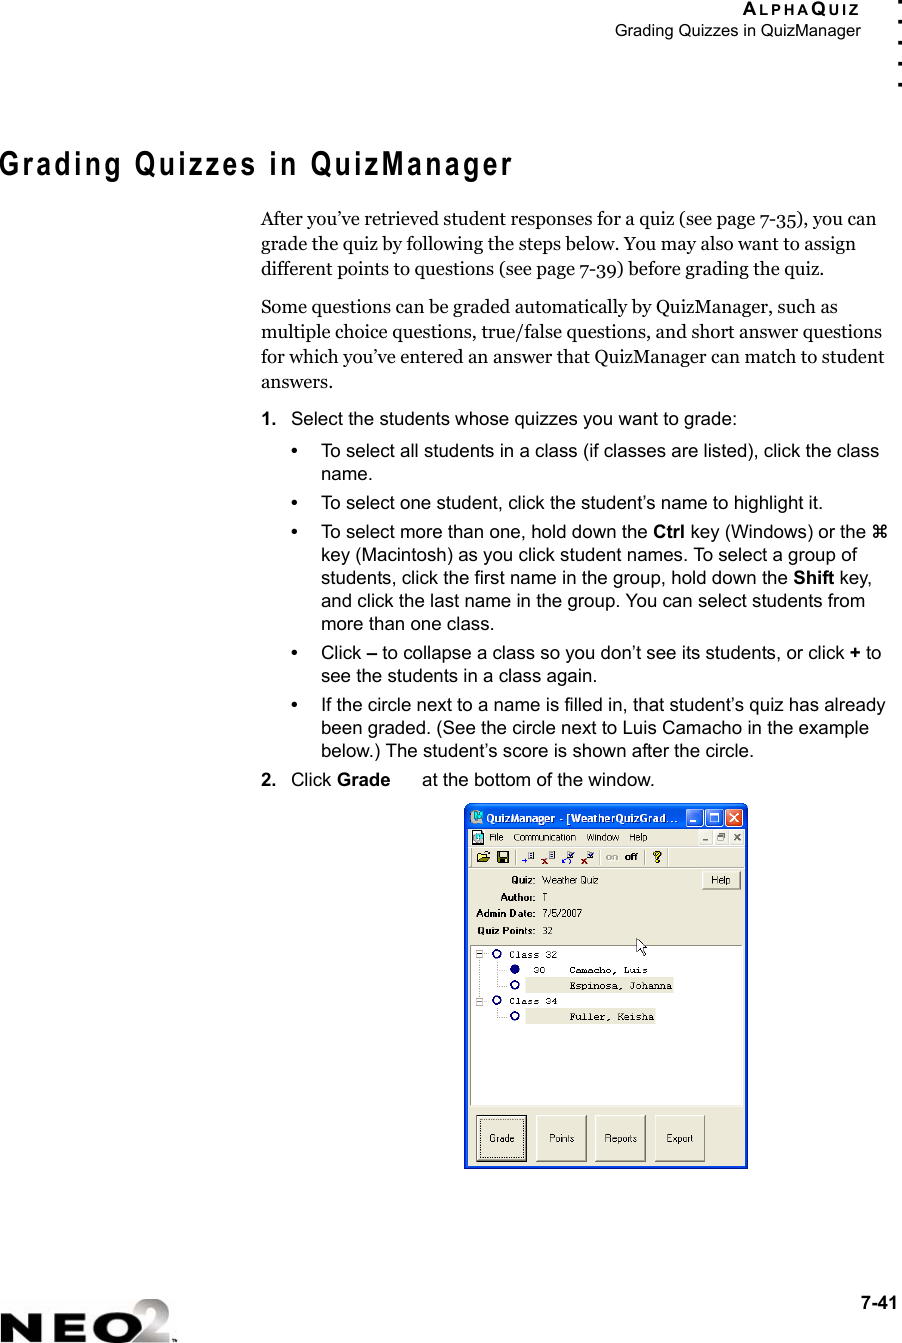 ALPHAQUIZGrading Quizzes in QuizManager7-41. . . . .Grading Quizzes in QuizManagerAfter you’ve retrieved student responses for a quiz (see page 7-35), you can grade the quiz by following the steps below. You may also want to assign different points to questions (see page 7-39) before grading the quiz.Some questions can be graded automatically by QuizManager, such as multiple choice questions, true/false questions, and short answer questions for which you’ve entered an answer that QuizManager can match to student answers.1. Select the students whose quizzes you want to grade:•To select all students in a class (if classes are listed), click the class name.•To select one student, click the student’s name to highlight it.•To select more than one, hold down the Ctrl key (Windows) or the z key (Macintosh) as you click student names. To select a group of students, click the first name in the group, hold down the Shift key, and click the last name in the group. You can select students from more than one class.•Click – to collapse a class so you don’t see its students, or click + to see the students in a class again.•If the circle next to a name is filled in, that student’s quiz has already been graded. (See the circle next to Luis Camacho in the example below.) The student’s score is shown after the circle.2. Click Grade   at the bottom of the window.